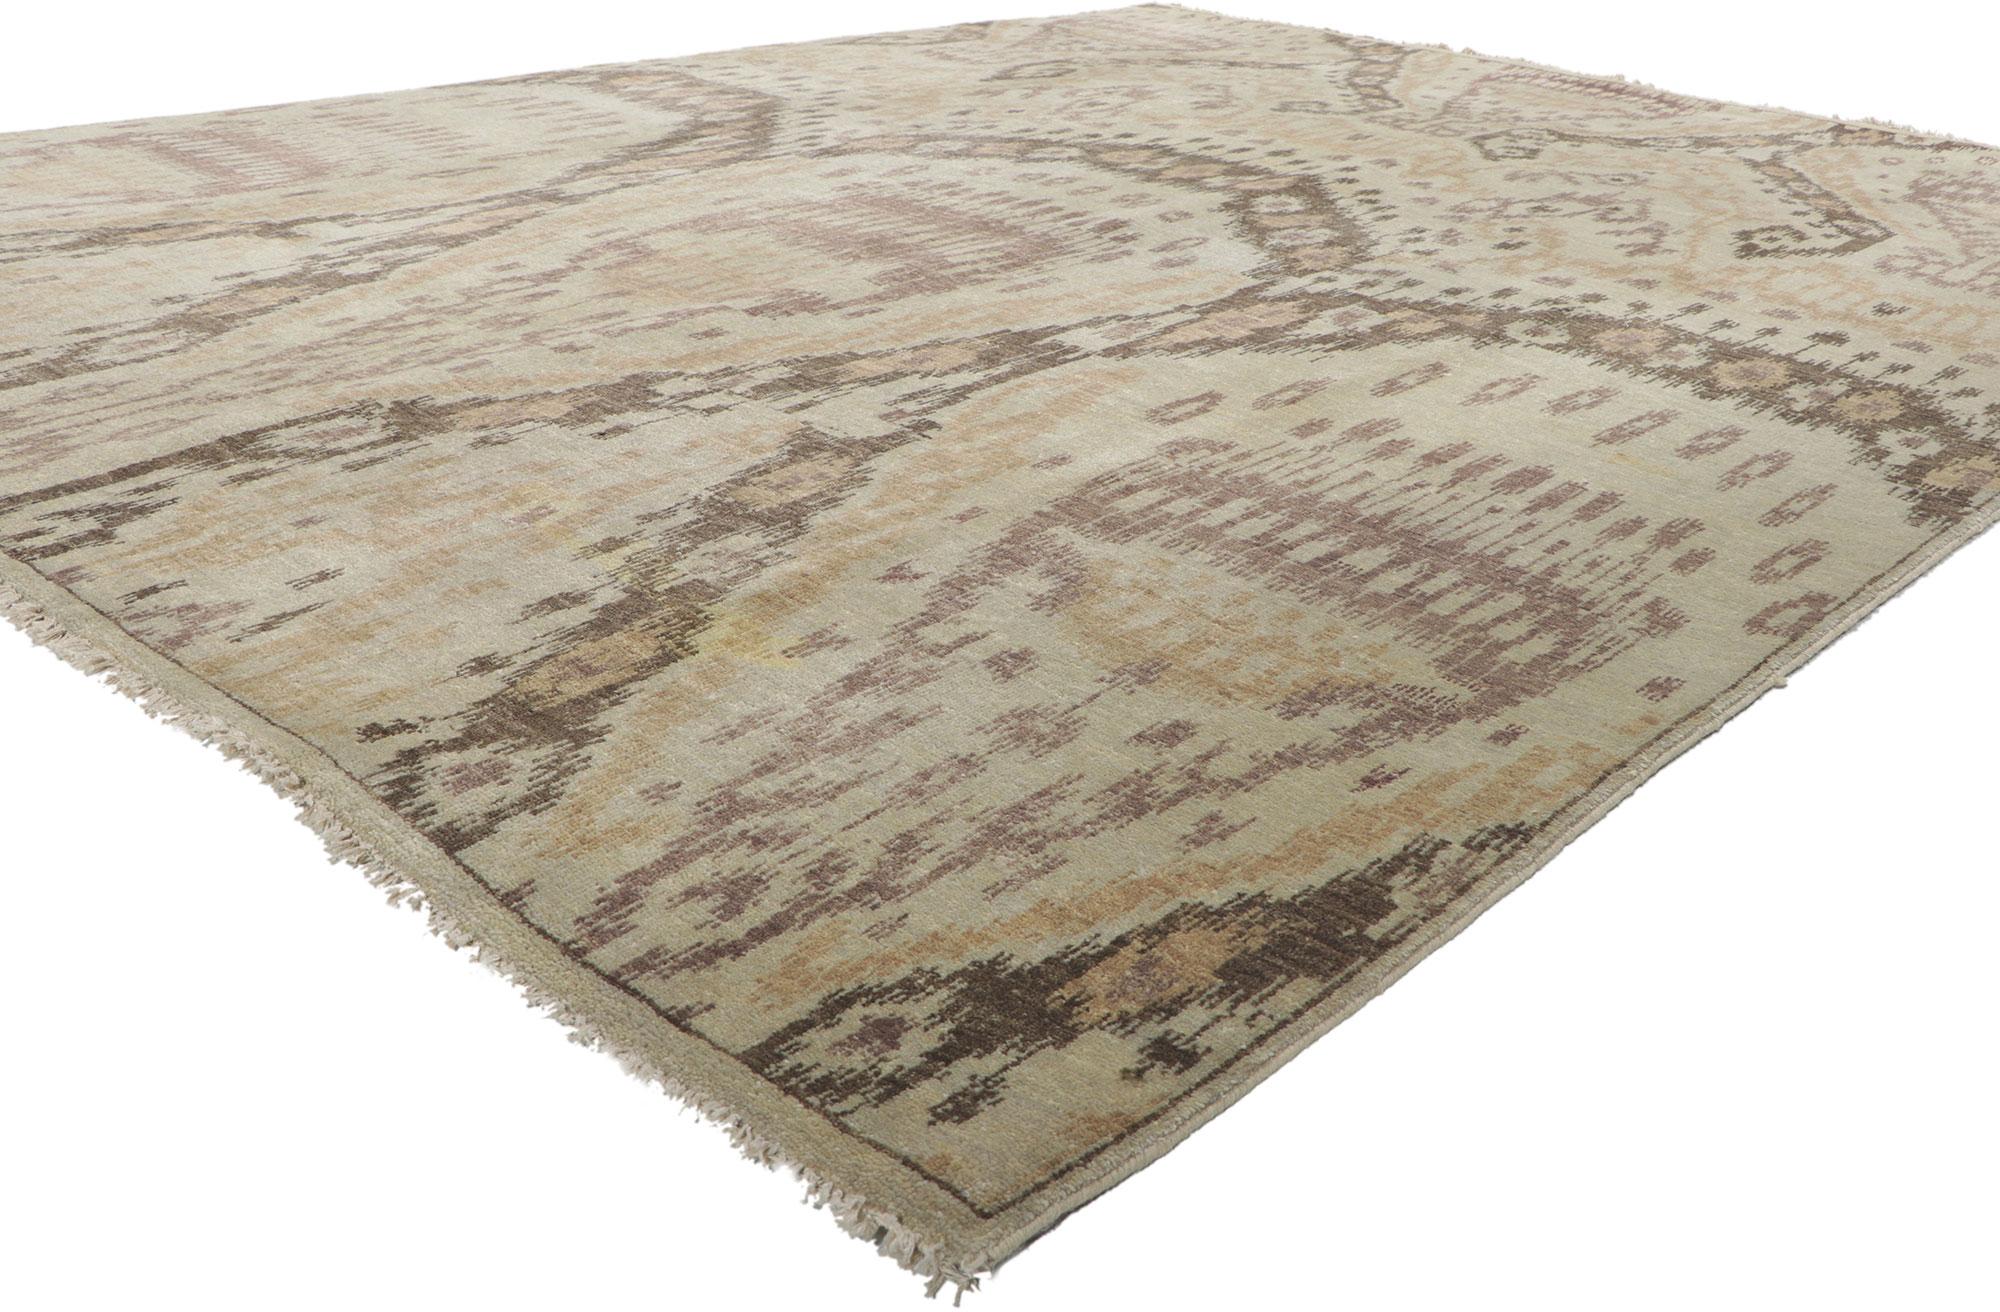 30046 New Transitional Ikat Rug, 07'09 x 10'00. With its incredible detail and texture, this hand knotted wool Ikat rug from India is a captivating vision of woven beauty. The eye-catching ikat design and earthy colorway woven into this piece work